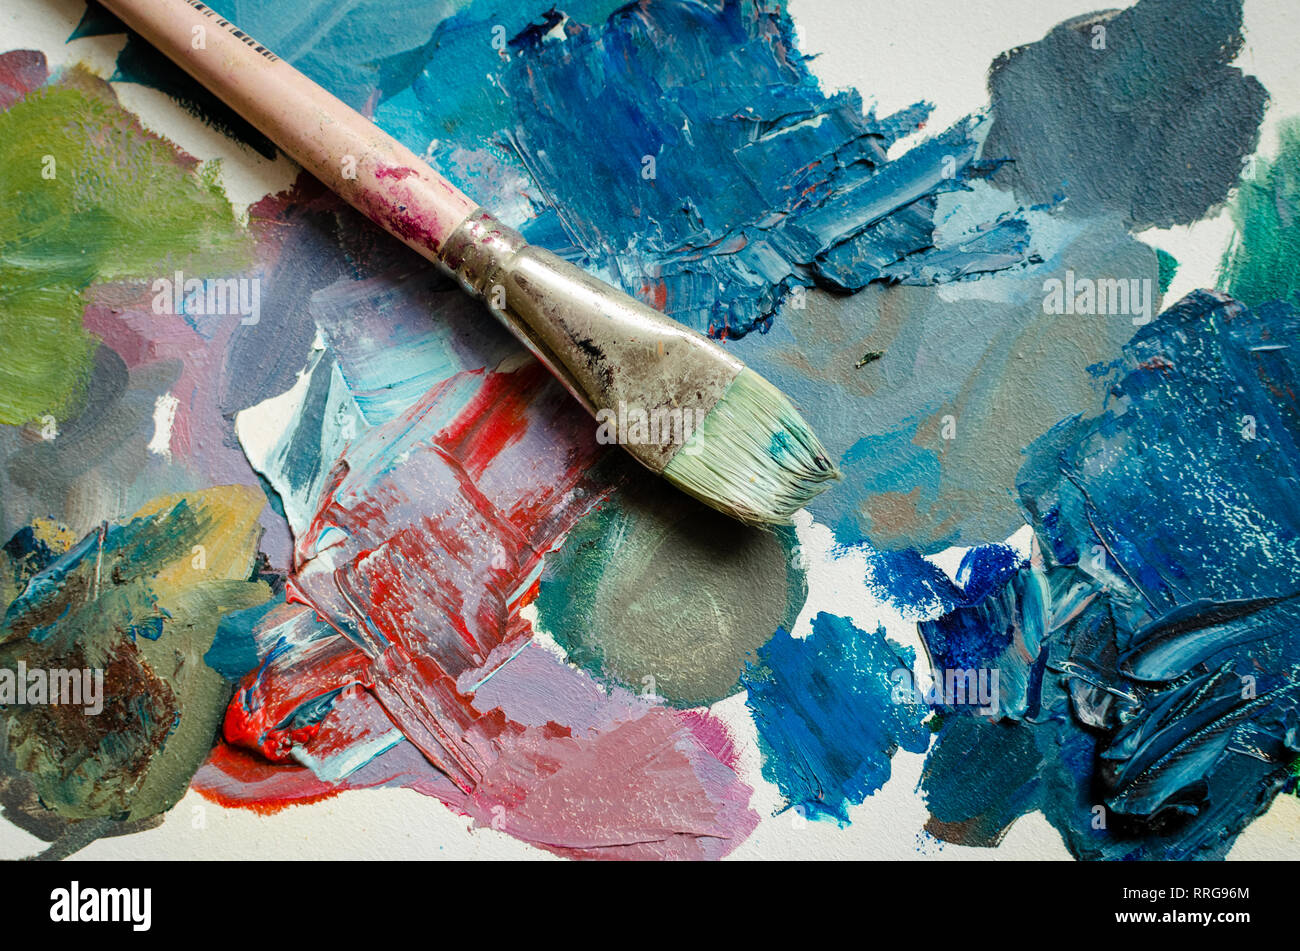 Equipment for painting, watercolor, Palette , paintbrush , mixing palette  Stock Photo - Alamy